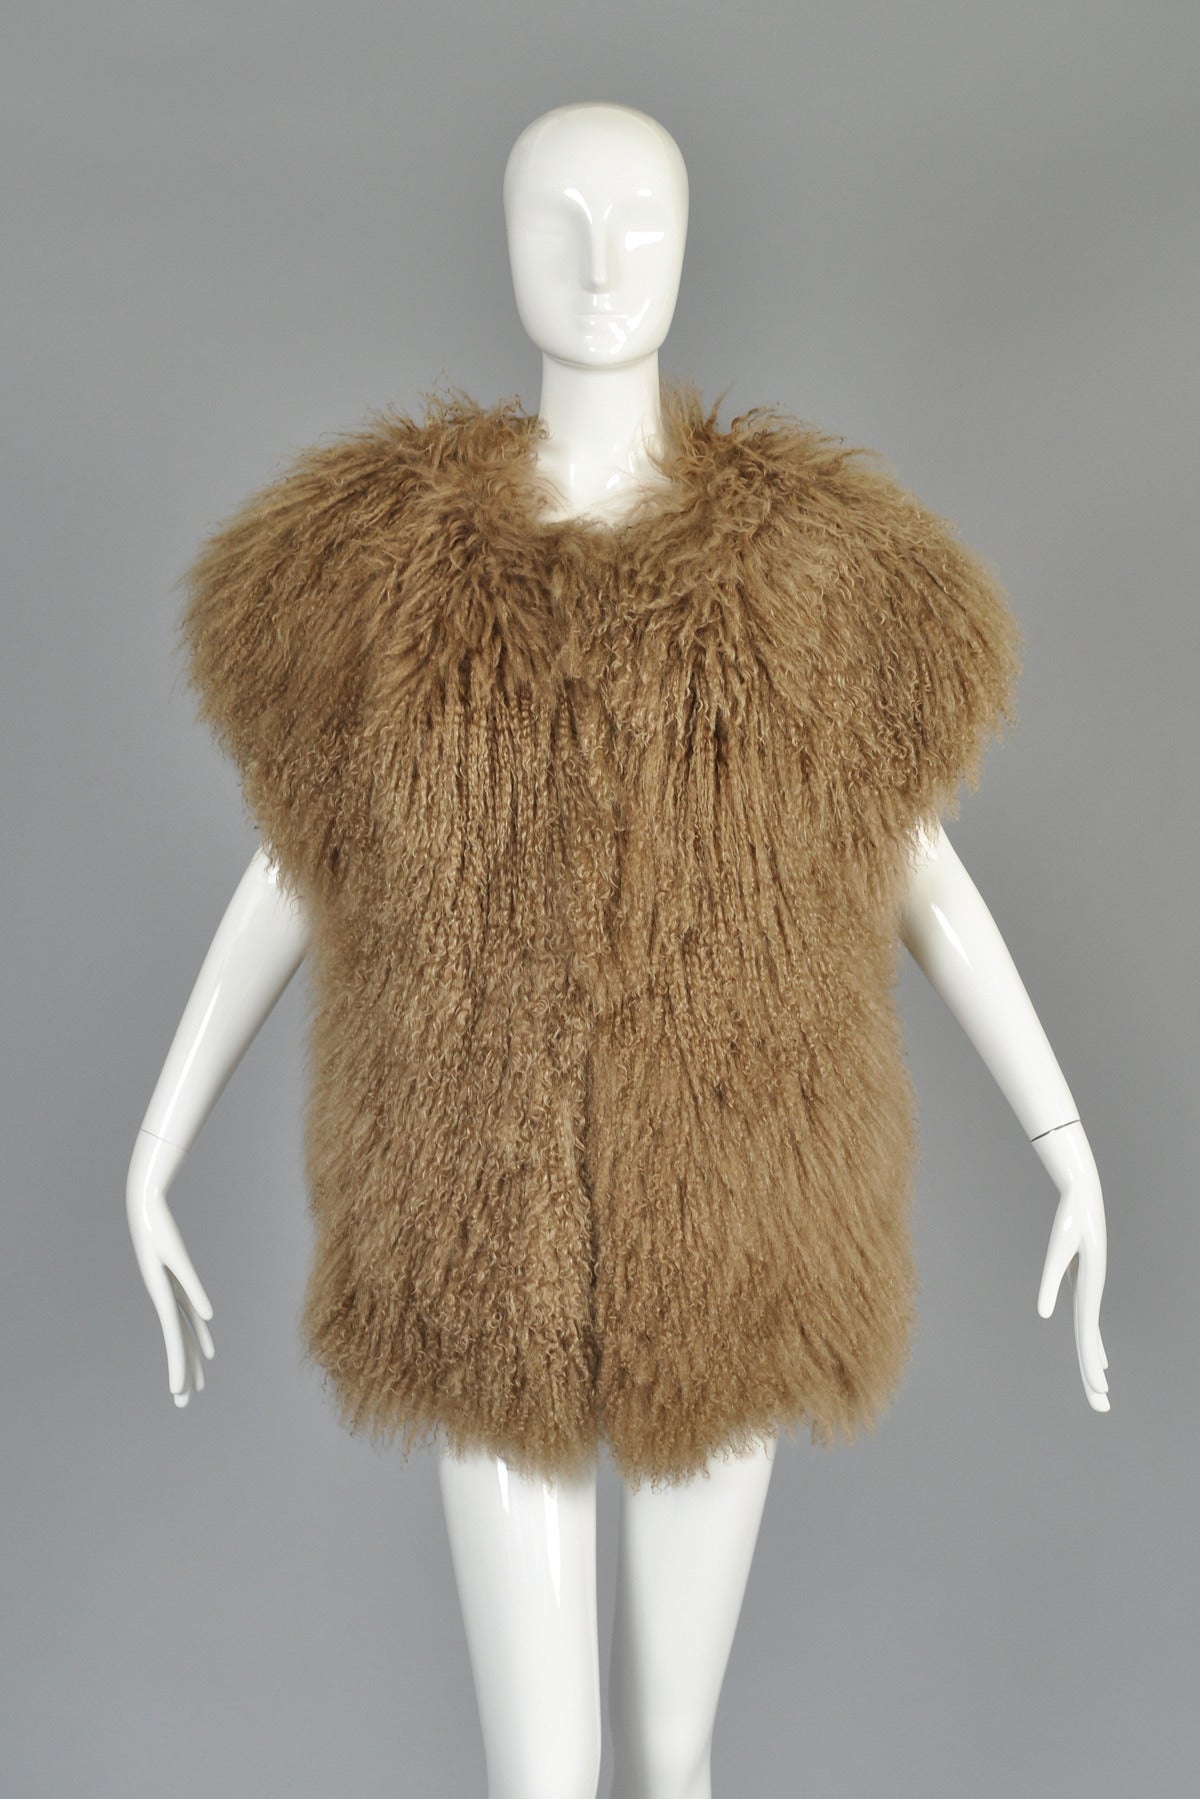 Ultra Shaggy 1980s Mocha Mongolian Lamb Fur Vest.  A super fucntional and classic find for any wardrobe! 

Super long and soft Tibetan lamb hair in a delicious mocha color. The photos have a slightly warmer tone than in real life.  Simple straight